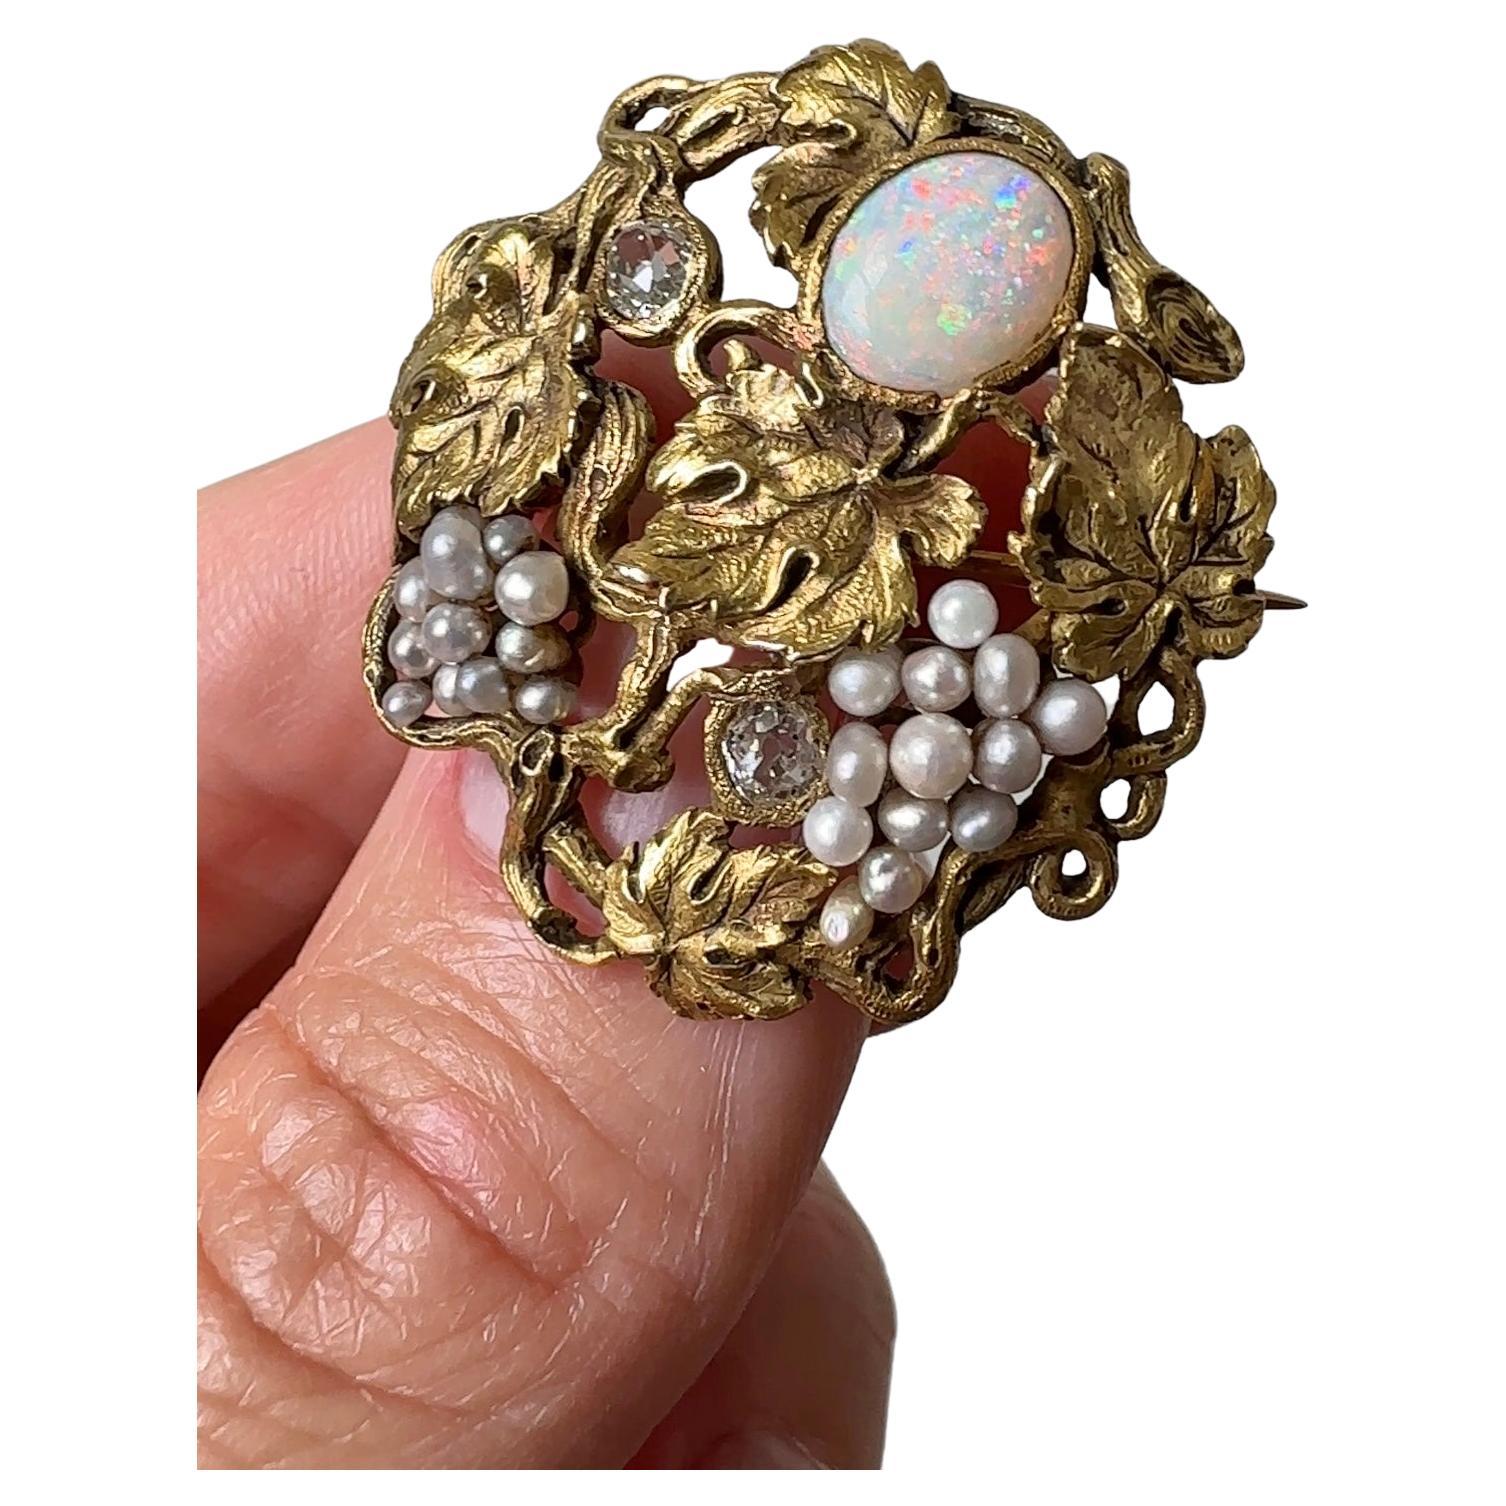 This enchanting Arts & Crafts era brooch has been artfully designed and meticulously hand-crafted in 14 karat gold by F.W. Lawrence, circa 1900. An electric cabochon opal moon and two glittering old mine-cut diamond stars peek through luminous pearl